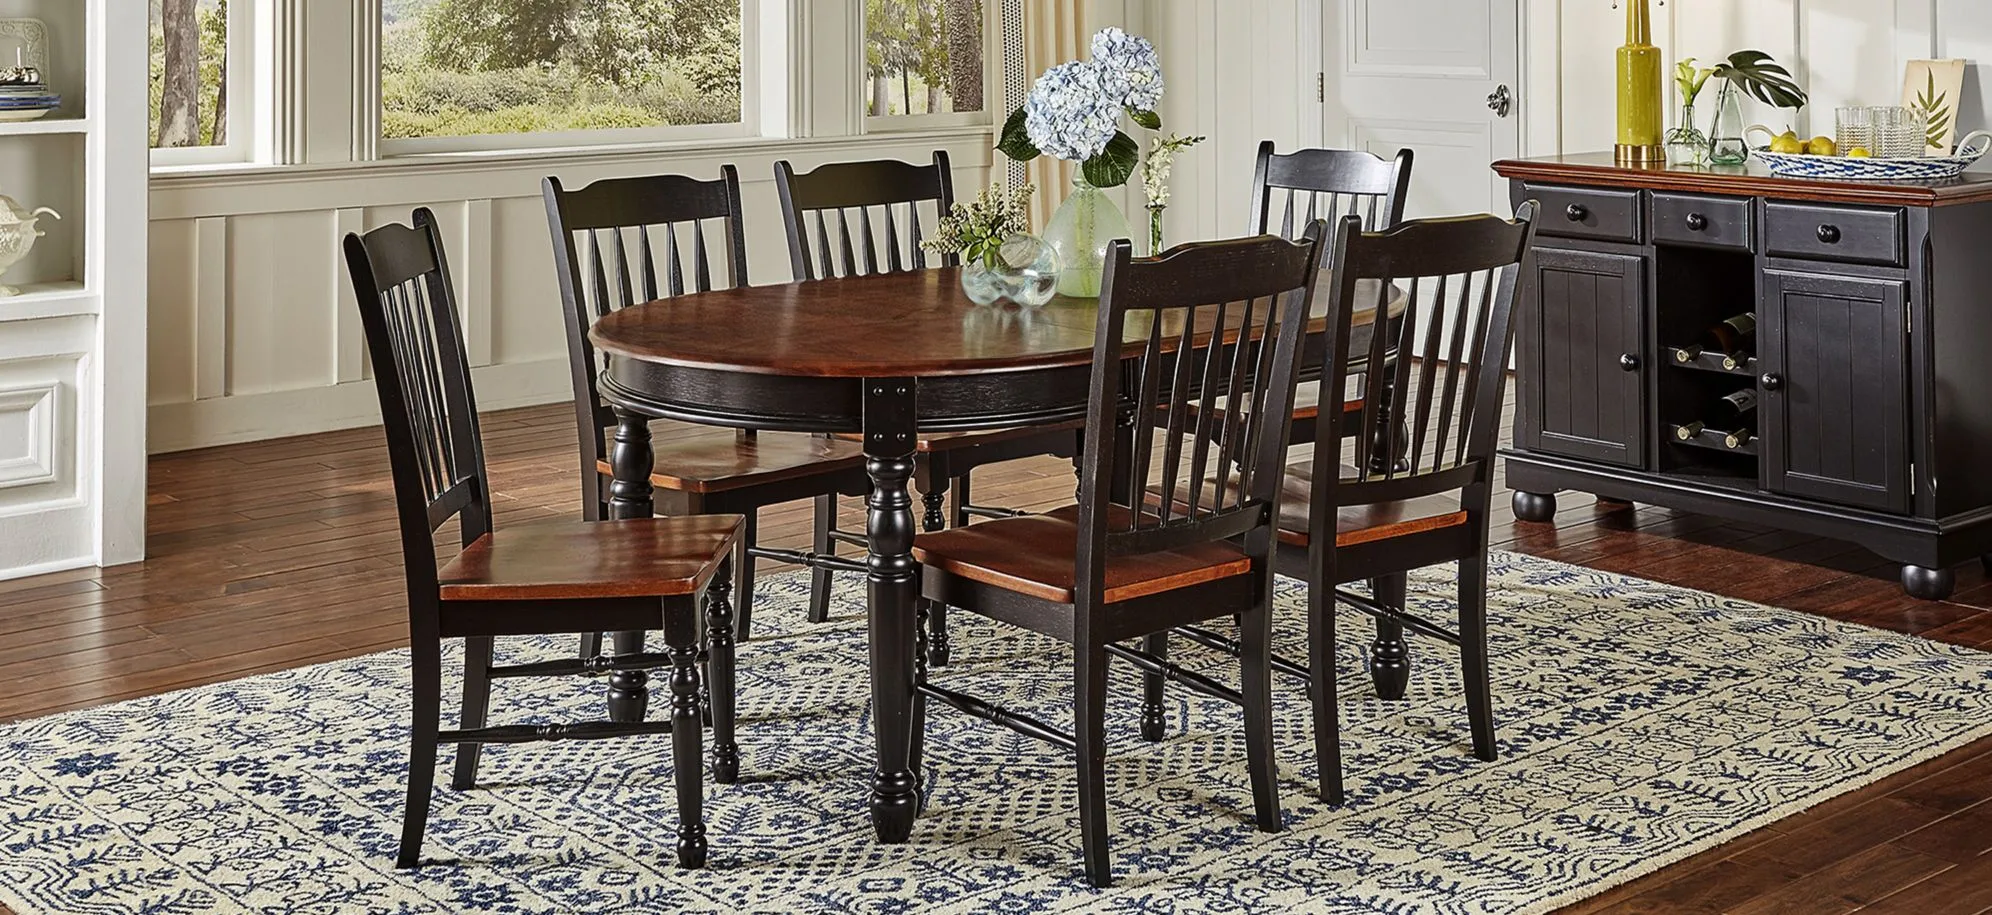 British Isles 7-pc. Oval Slatback Dining Set with Leaves in Oak-Black by A-America